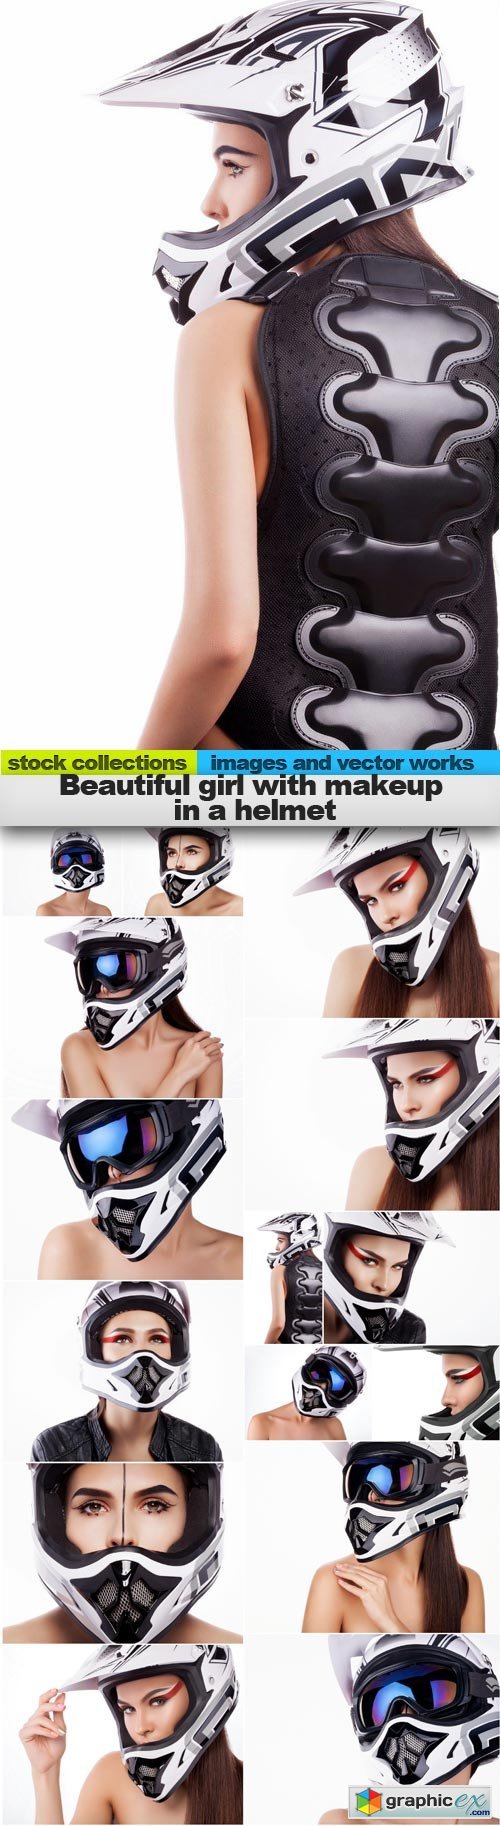 Beautiful girl with makeup in a helmet, 15 x UHQ JPEG